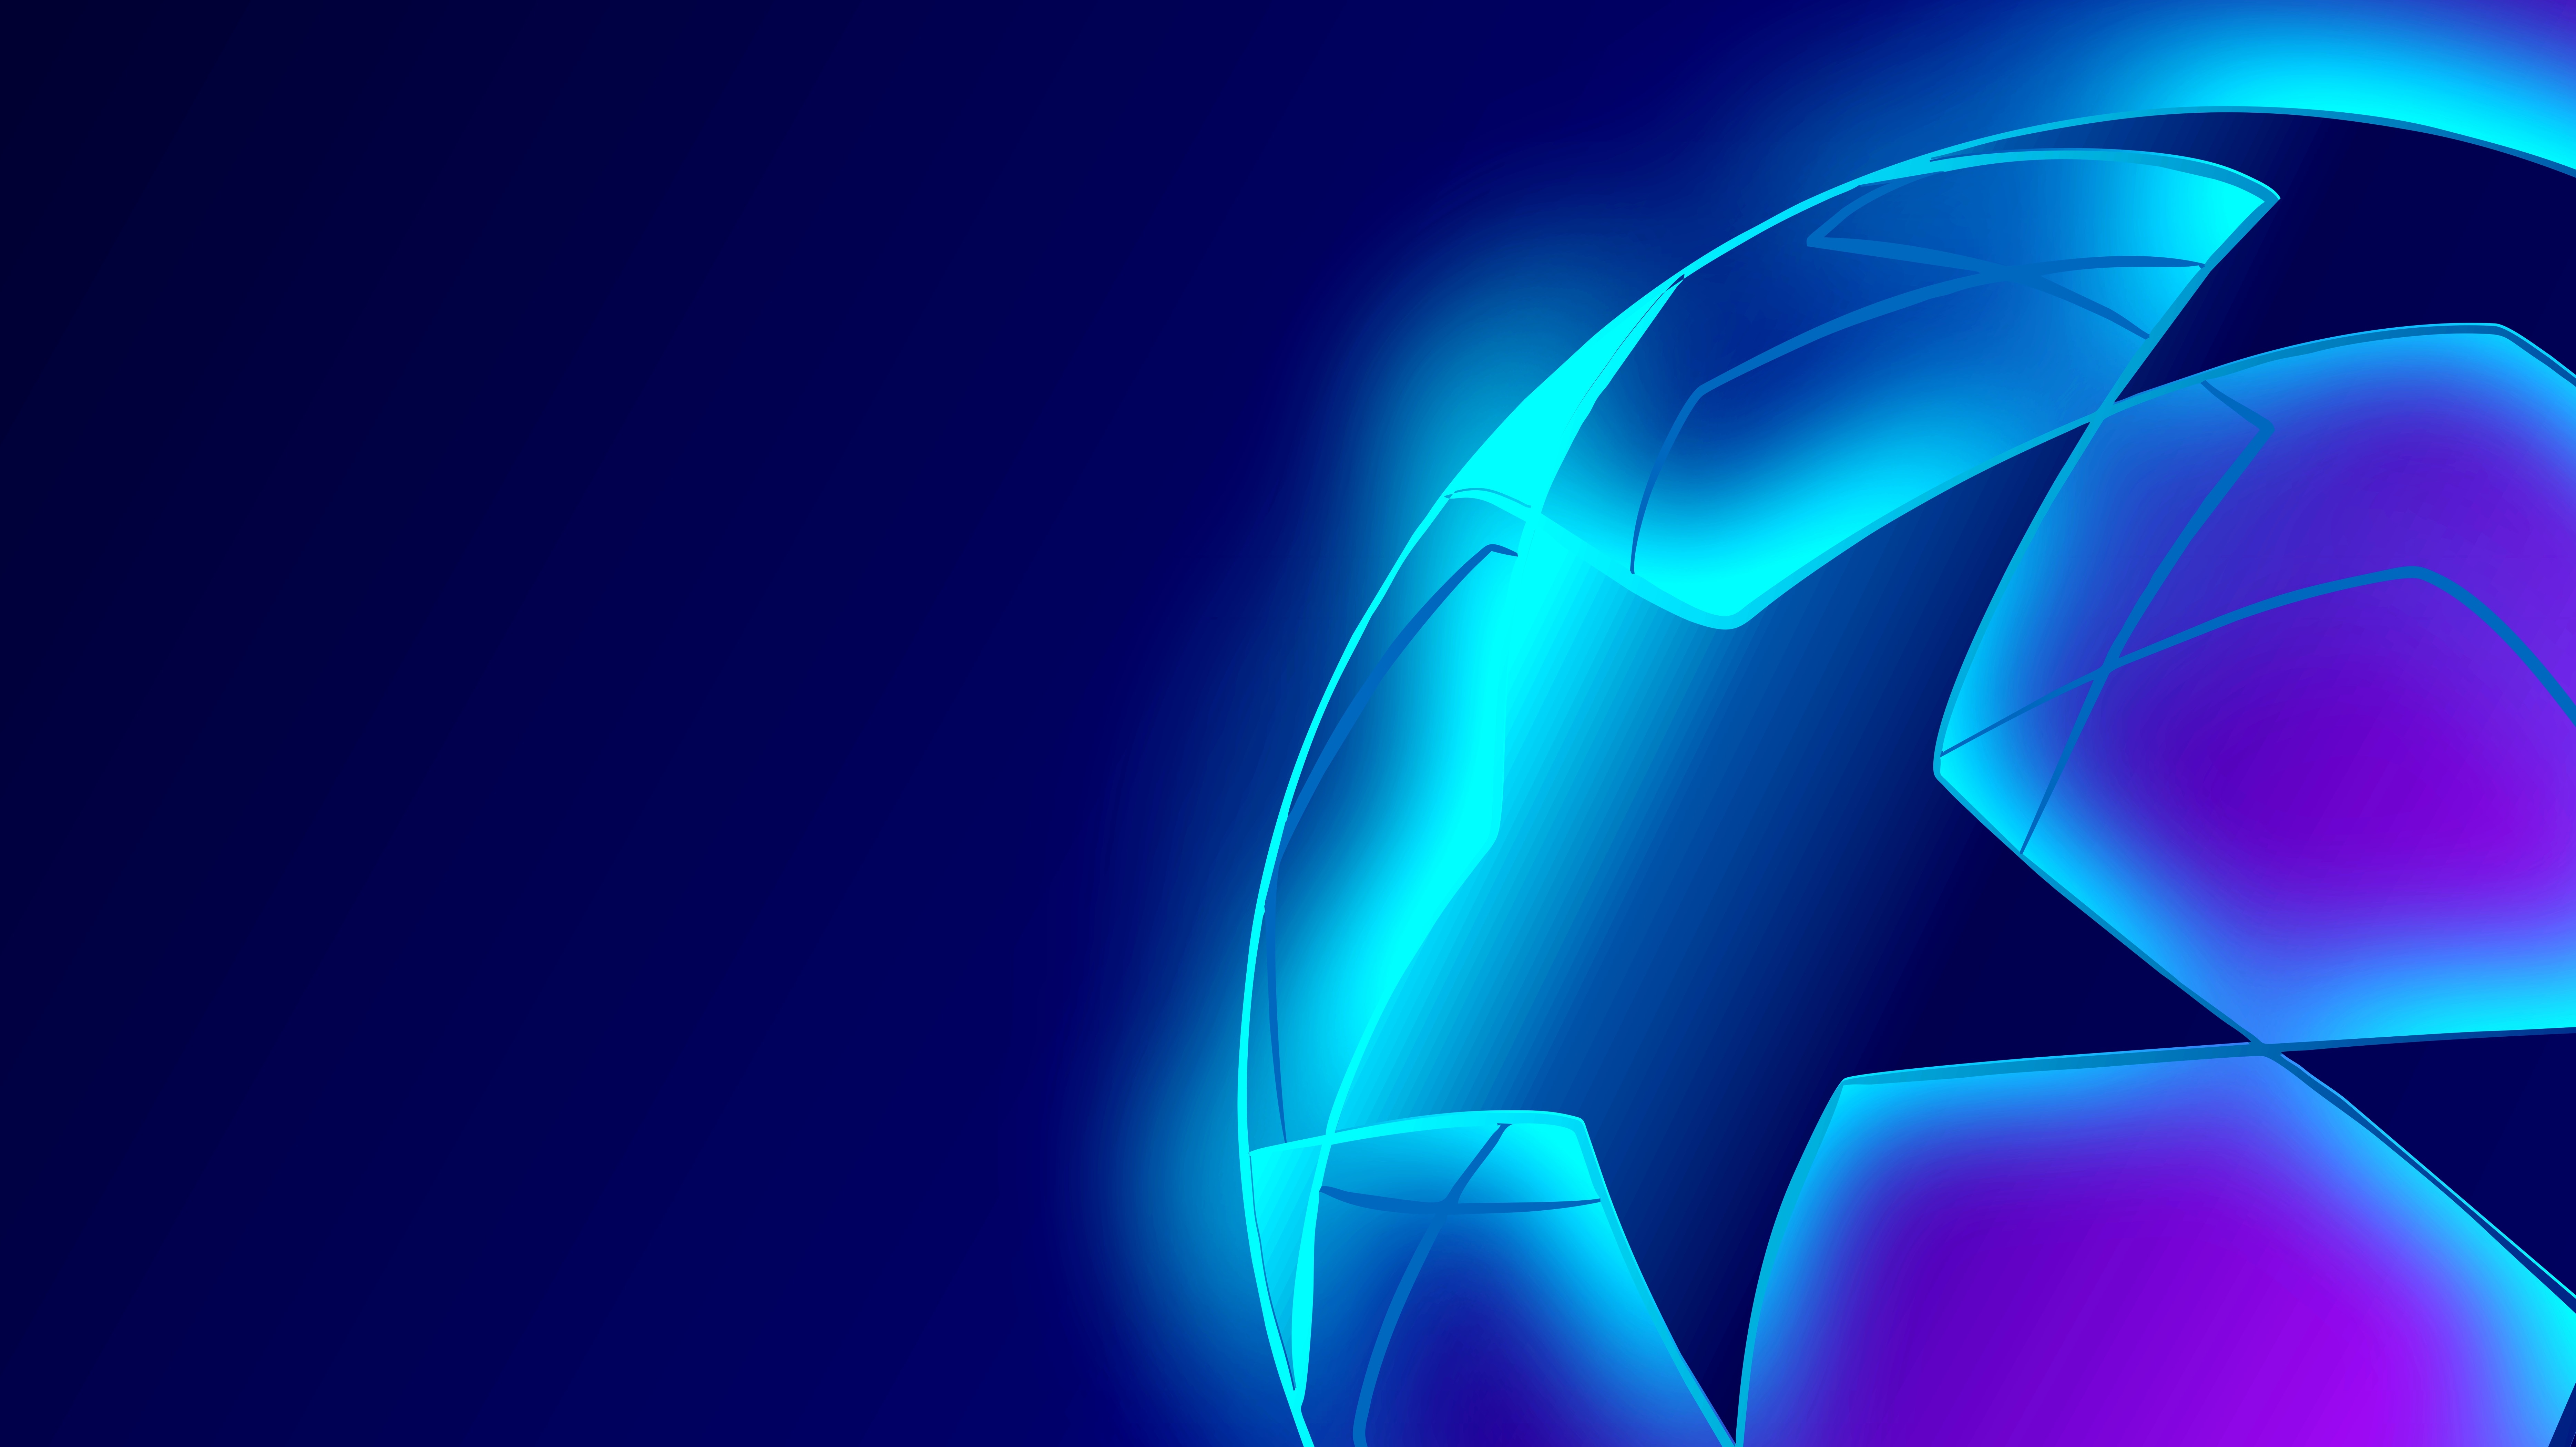 Crypto Platform Pulls Champions League Sponsorship: Could The Trend Continue?